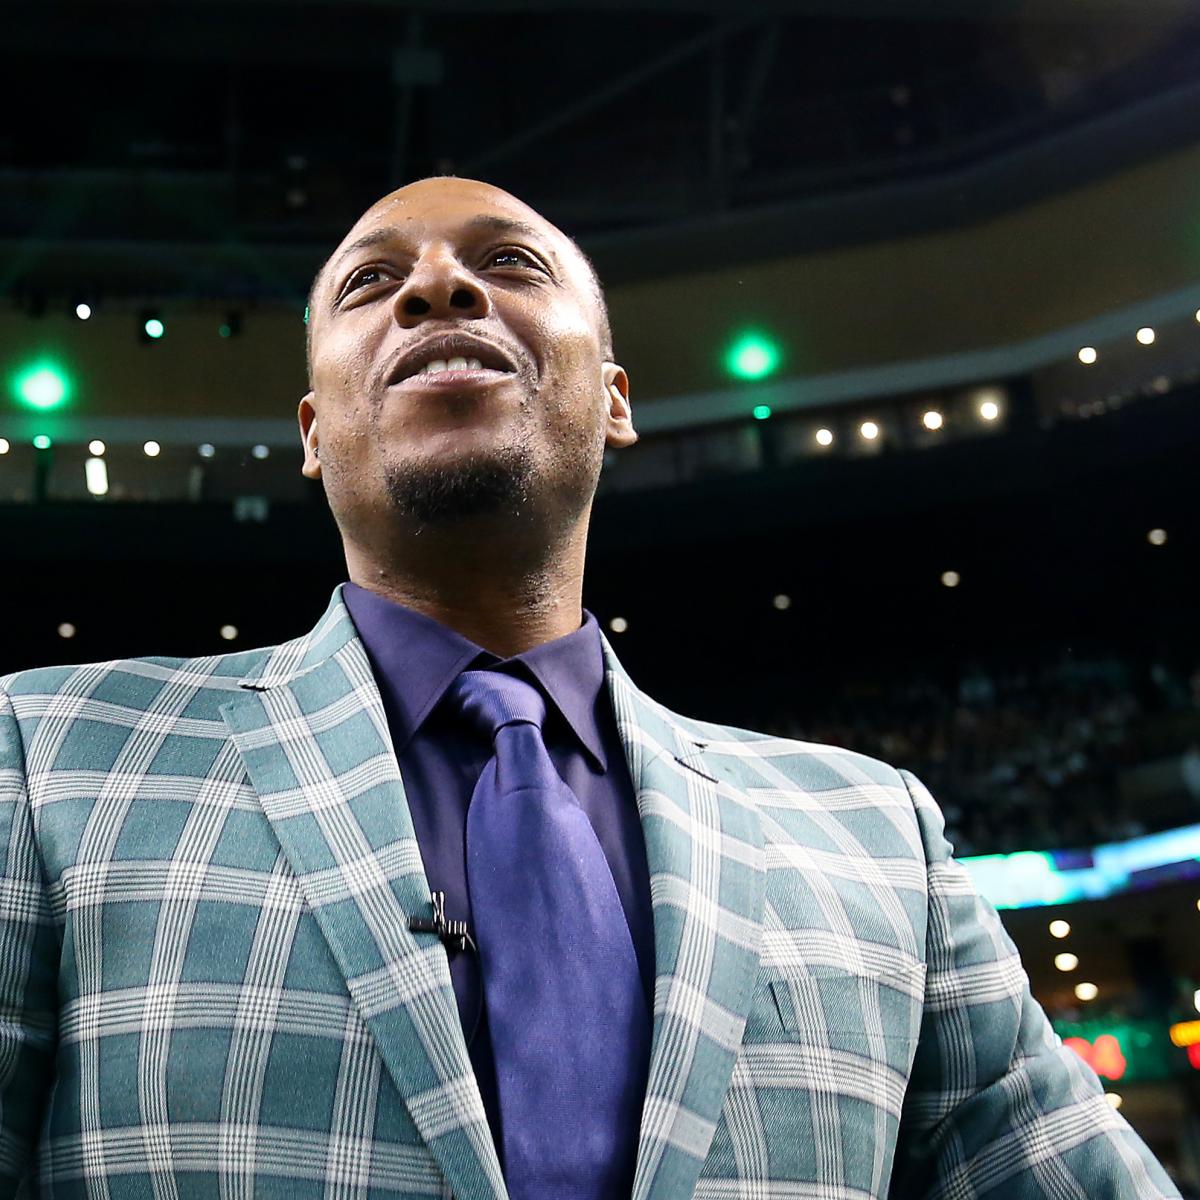 ESPN - Paul Pierce doesn't want Isaiah Thomas honored the same night as  Pierce's jersey retirement.